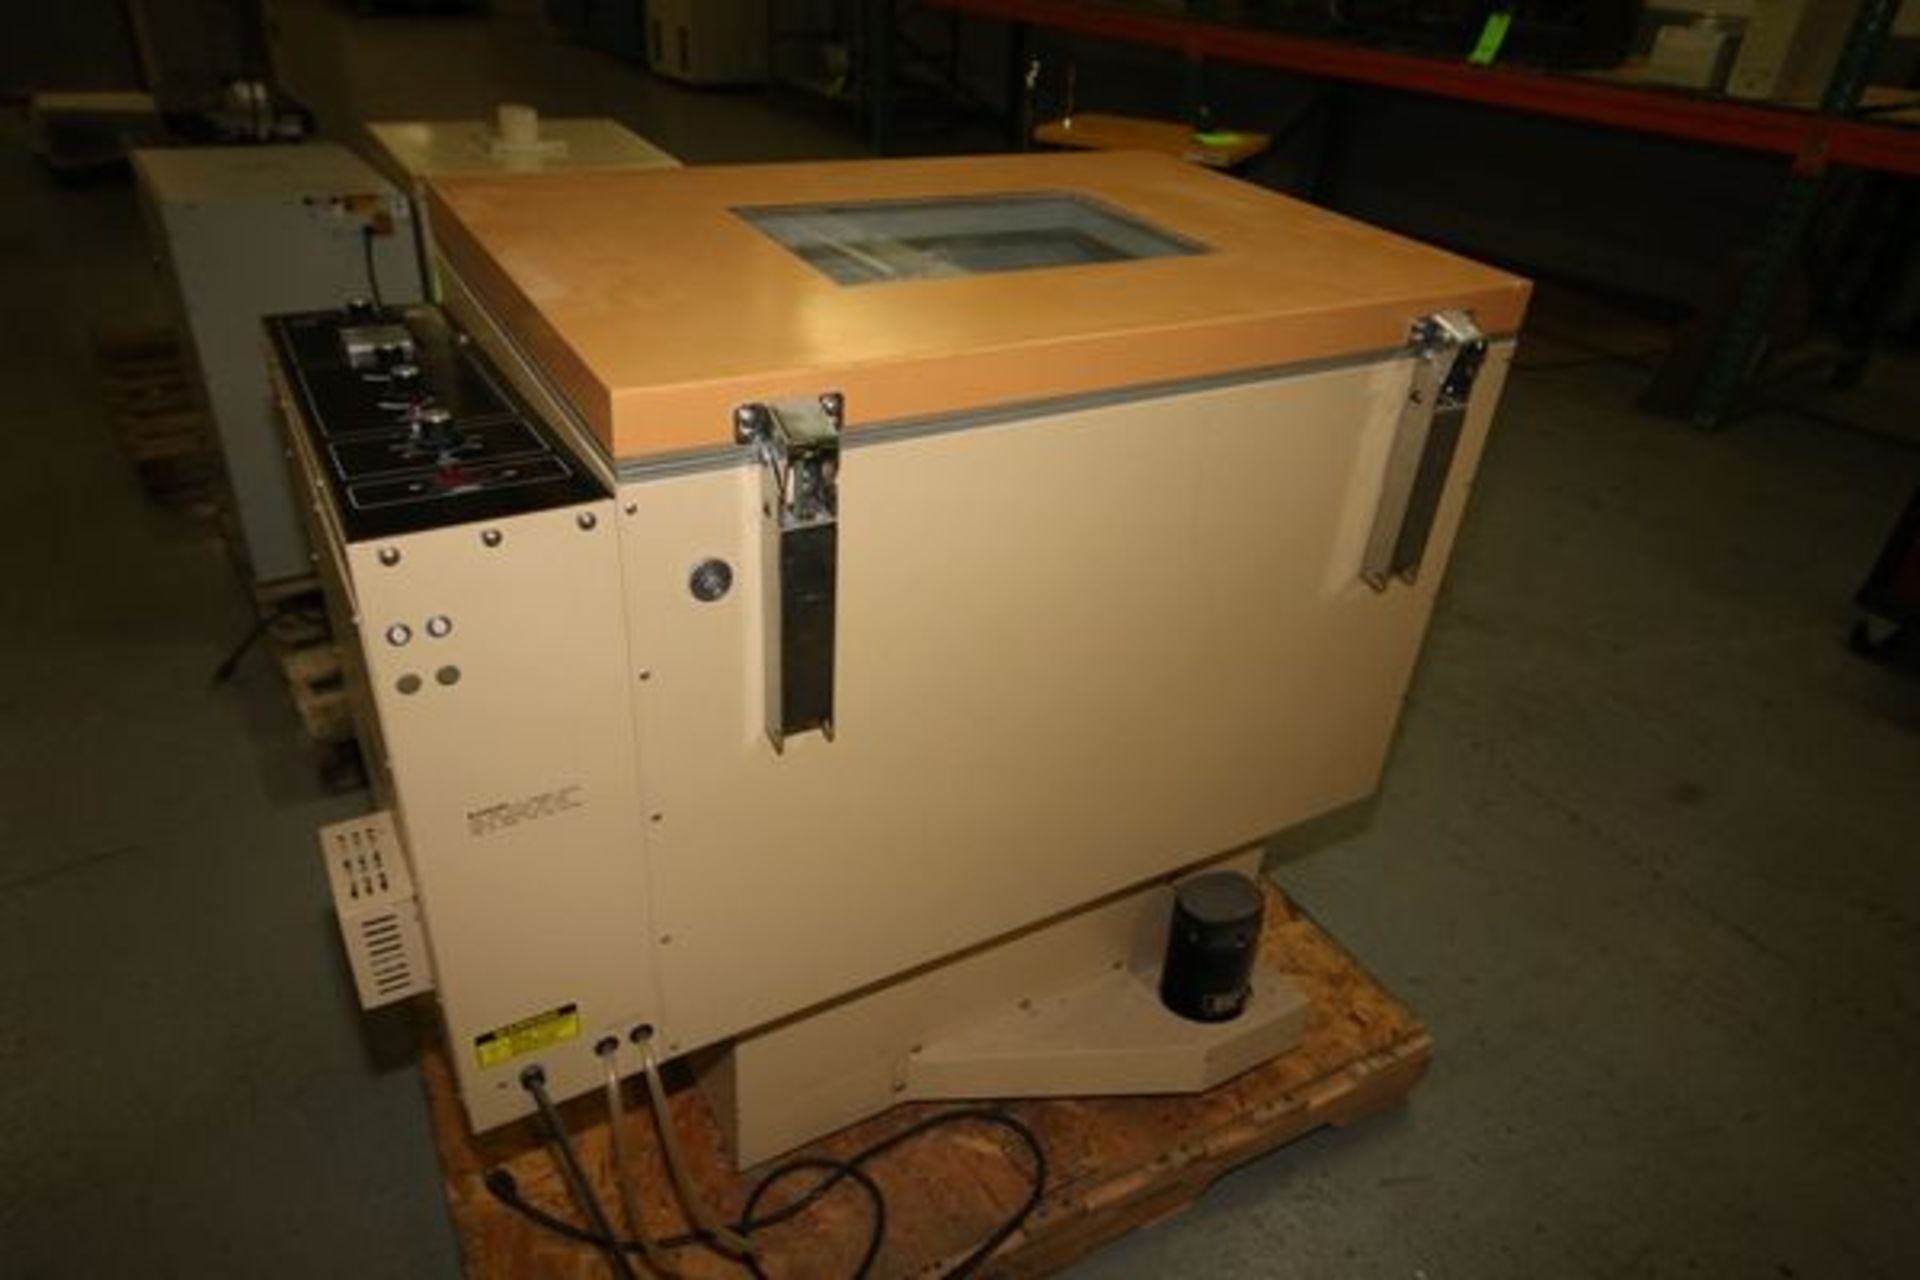 Lab-Line Incubator-Shaker, M/N 3526CC, S/N 0589-1835, with 1/4 hp Motor, Overall Dimensions: 46" - Image 5 of 6